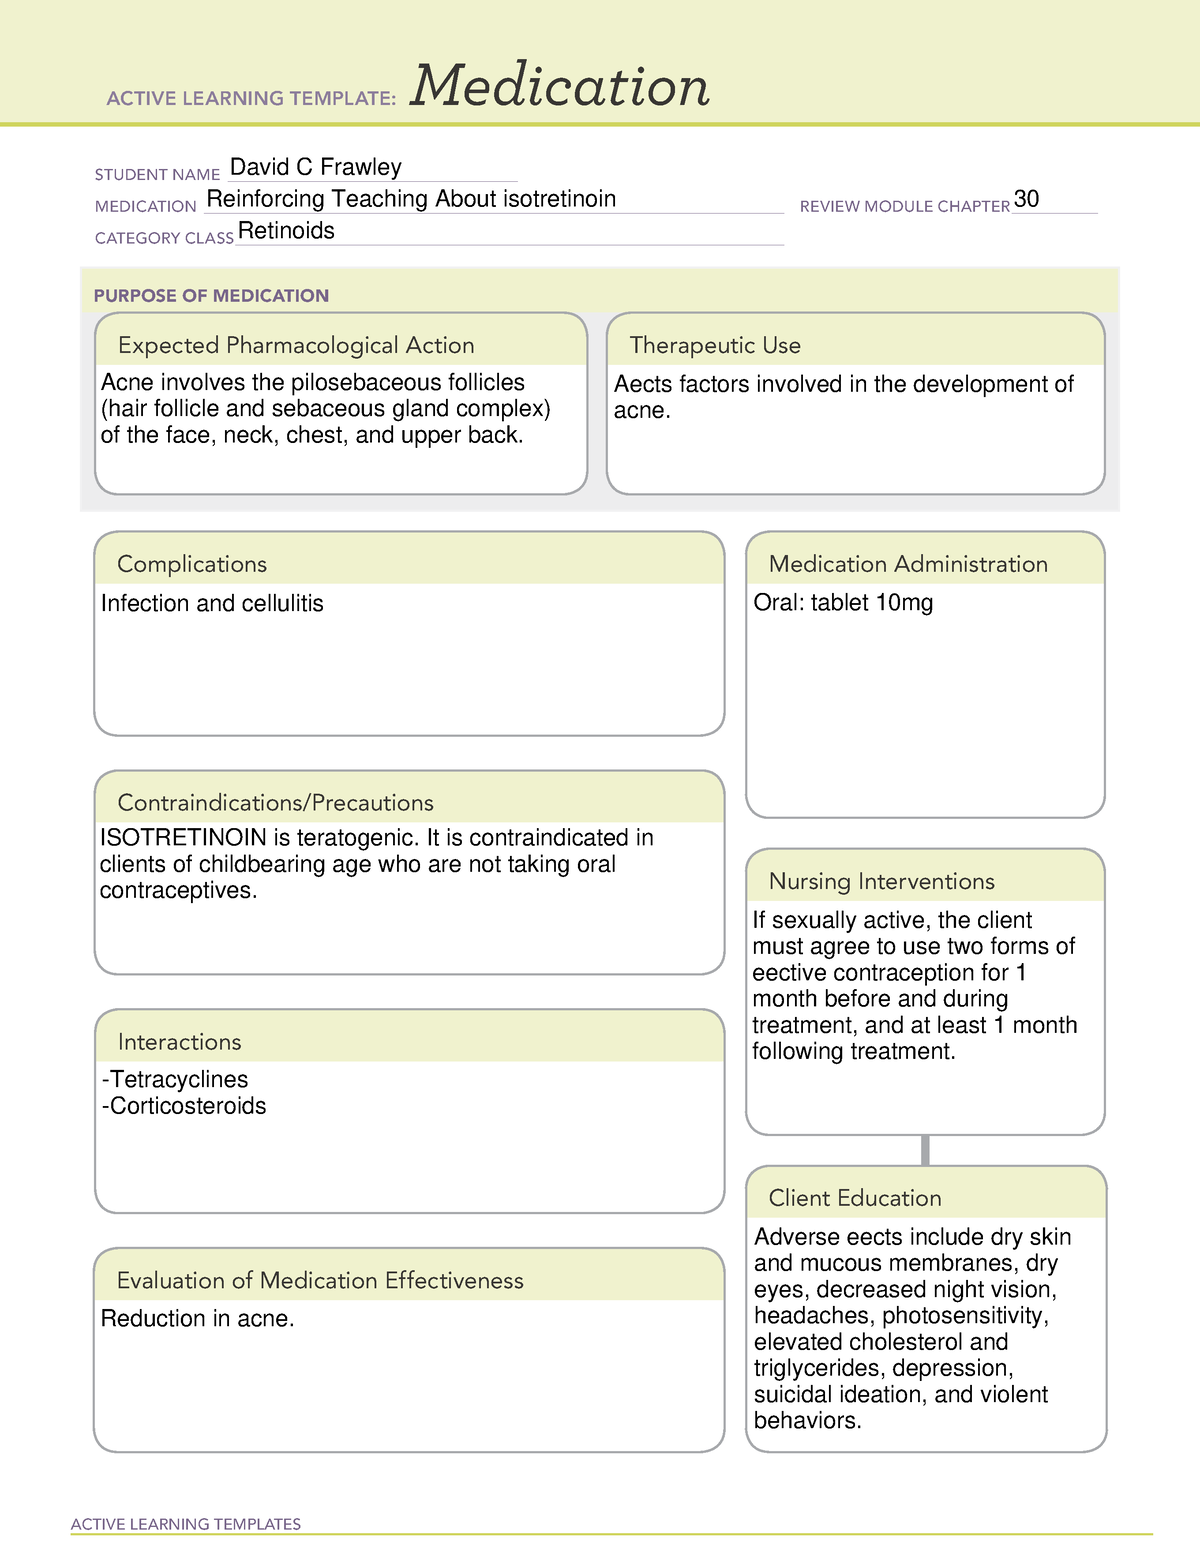 2. Reinforcing Teaching About isotretinoin ACTIVE LEARNING TEMPLATES